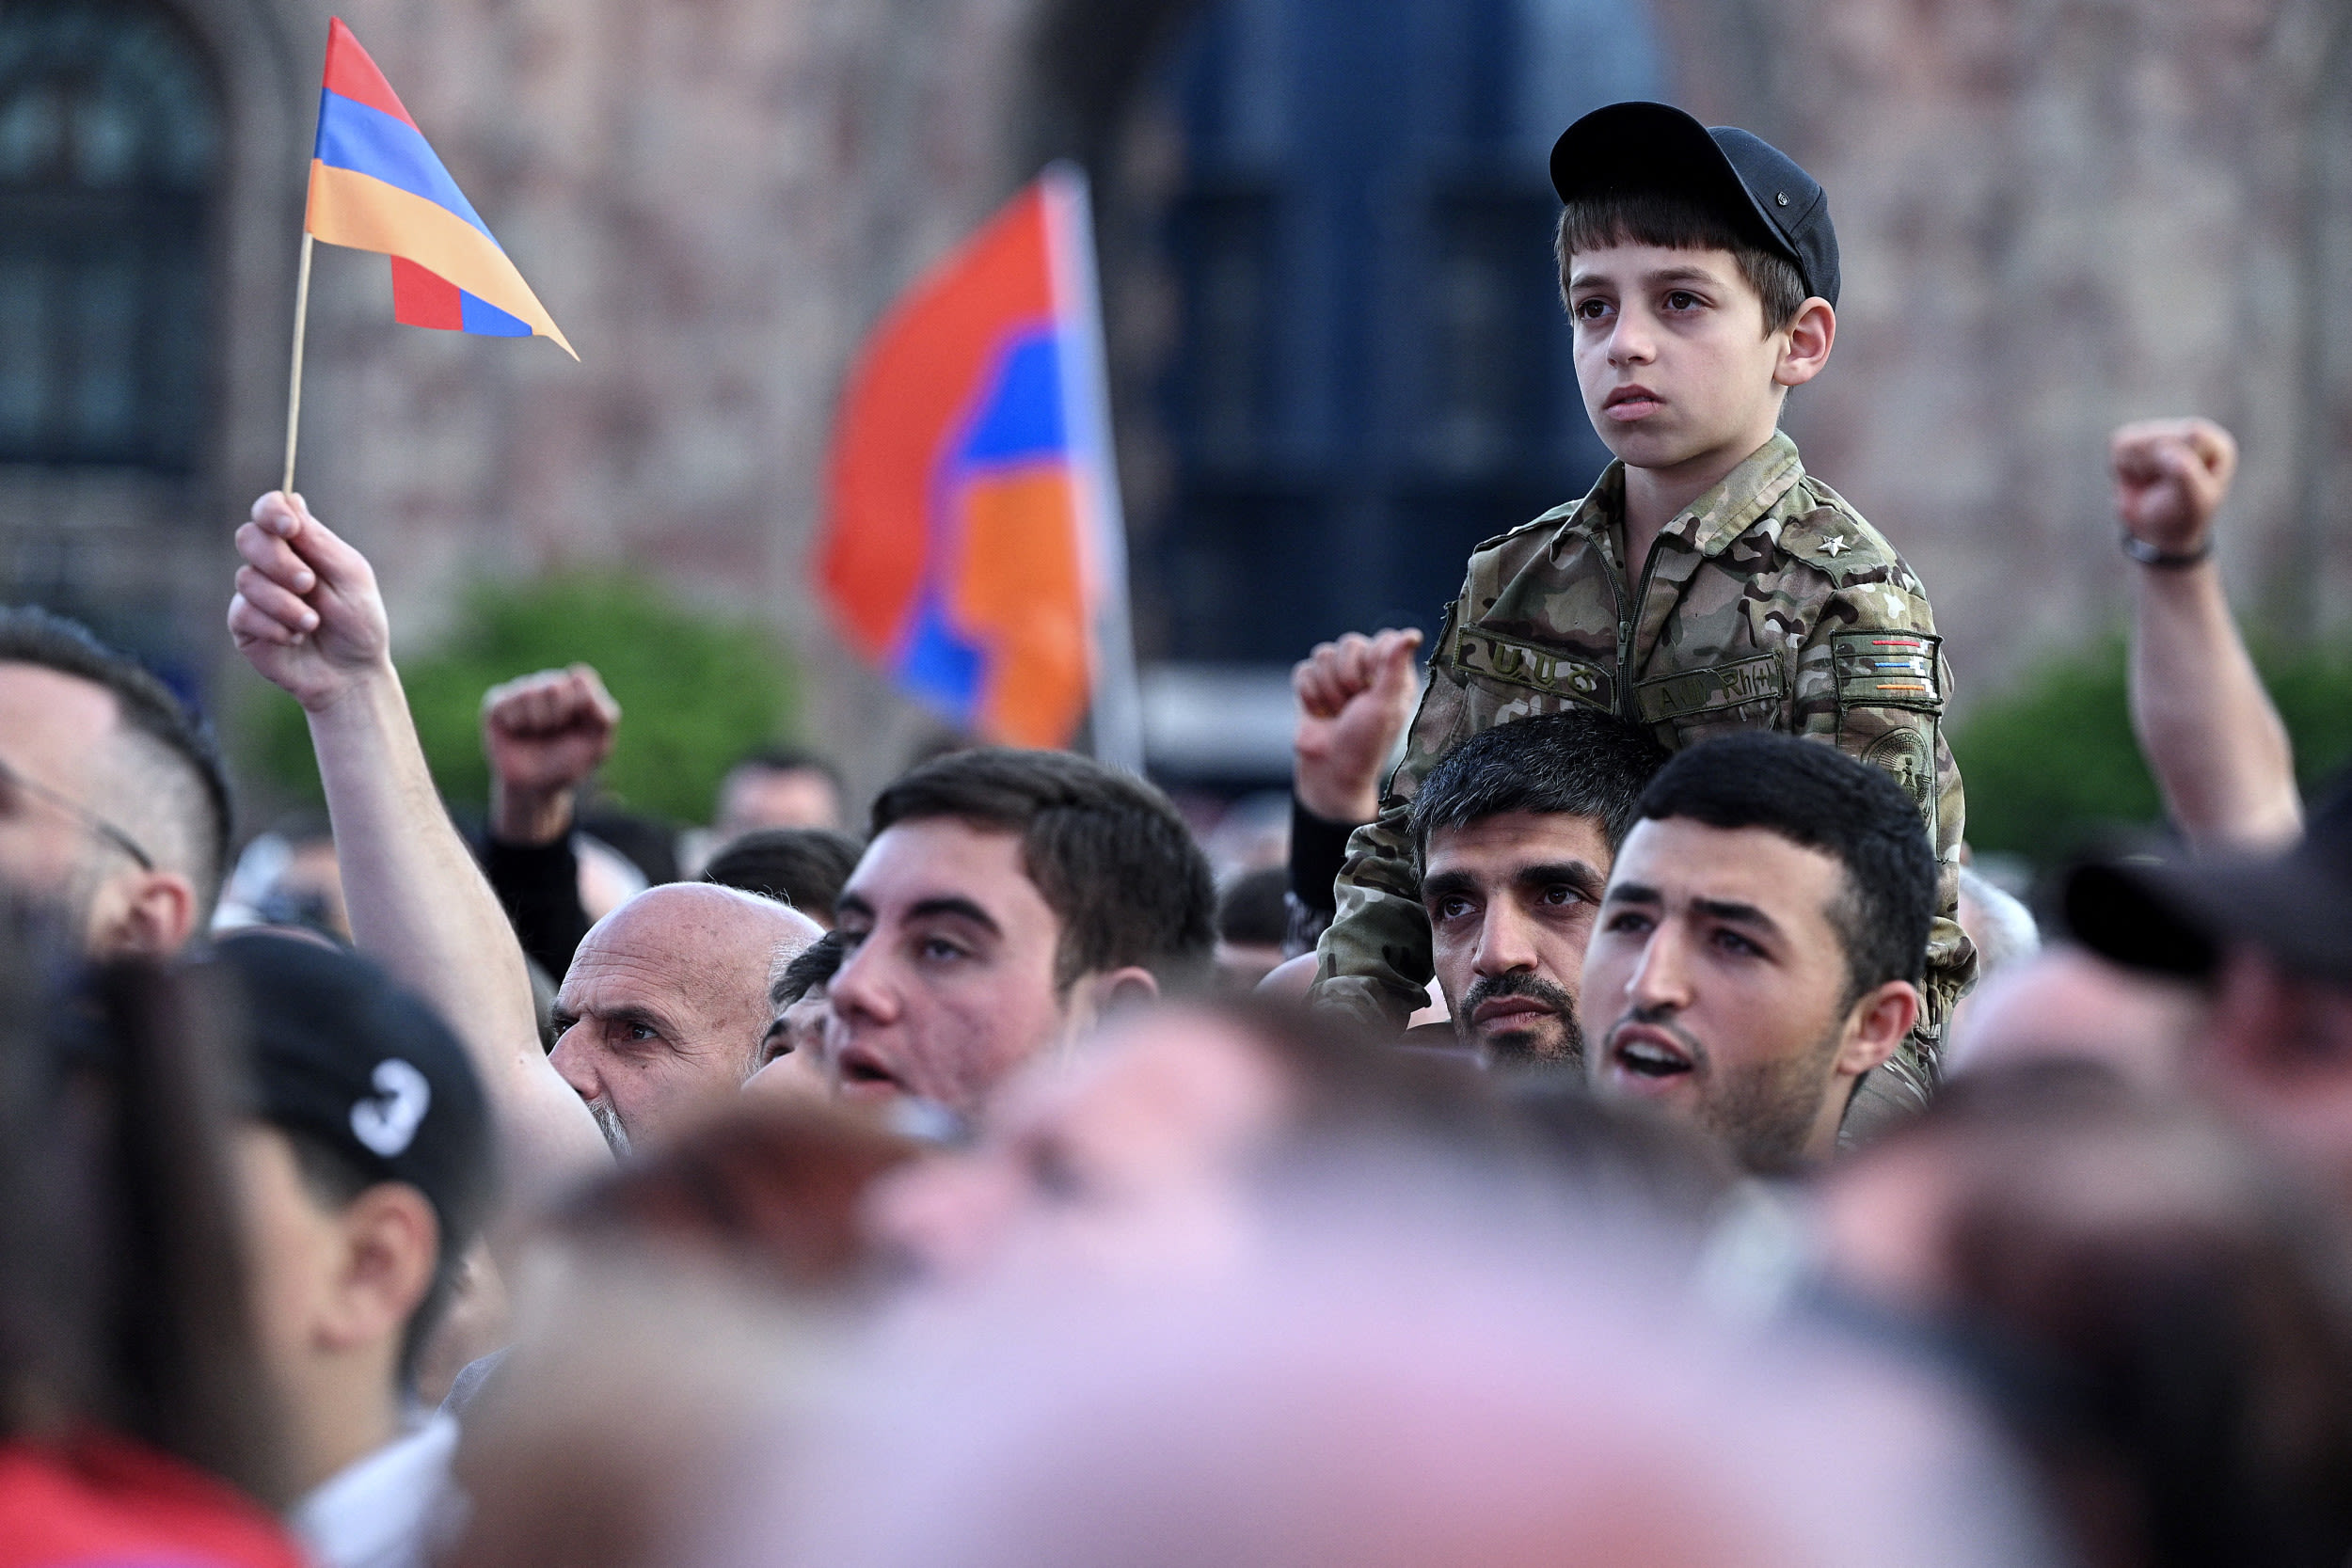 Mass Protests in Armenia Demand End of Concessions to Azerbaijan